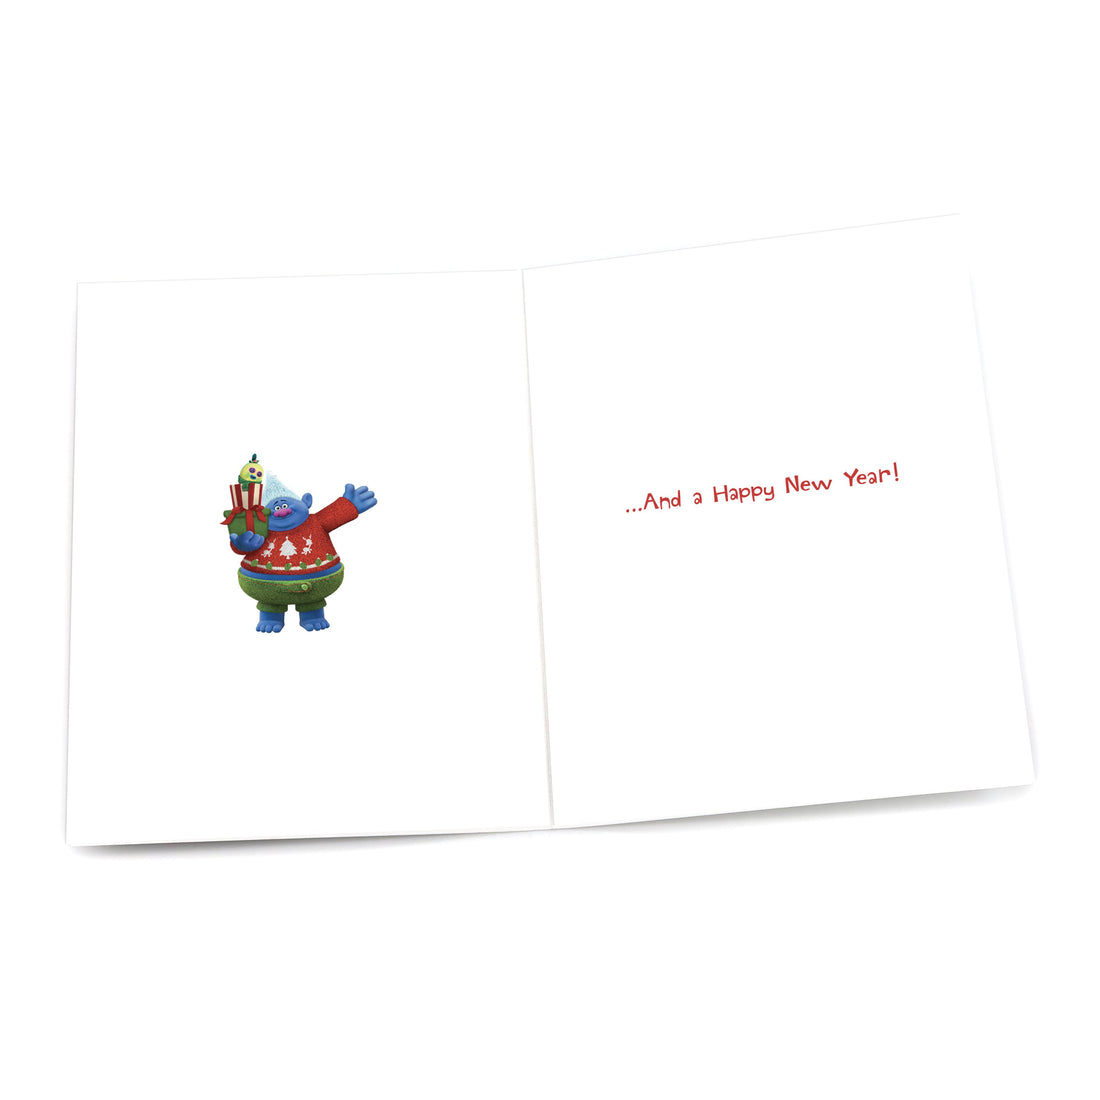 Trolls World Tour - Biggie and Mr. Dinkles "Merry Trolls-mas" Holiday Card